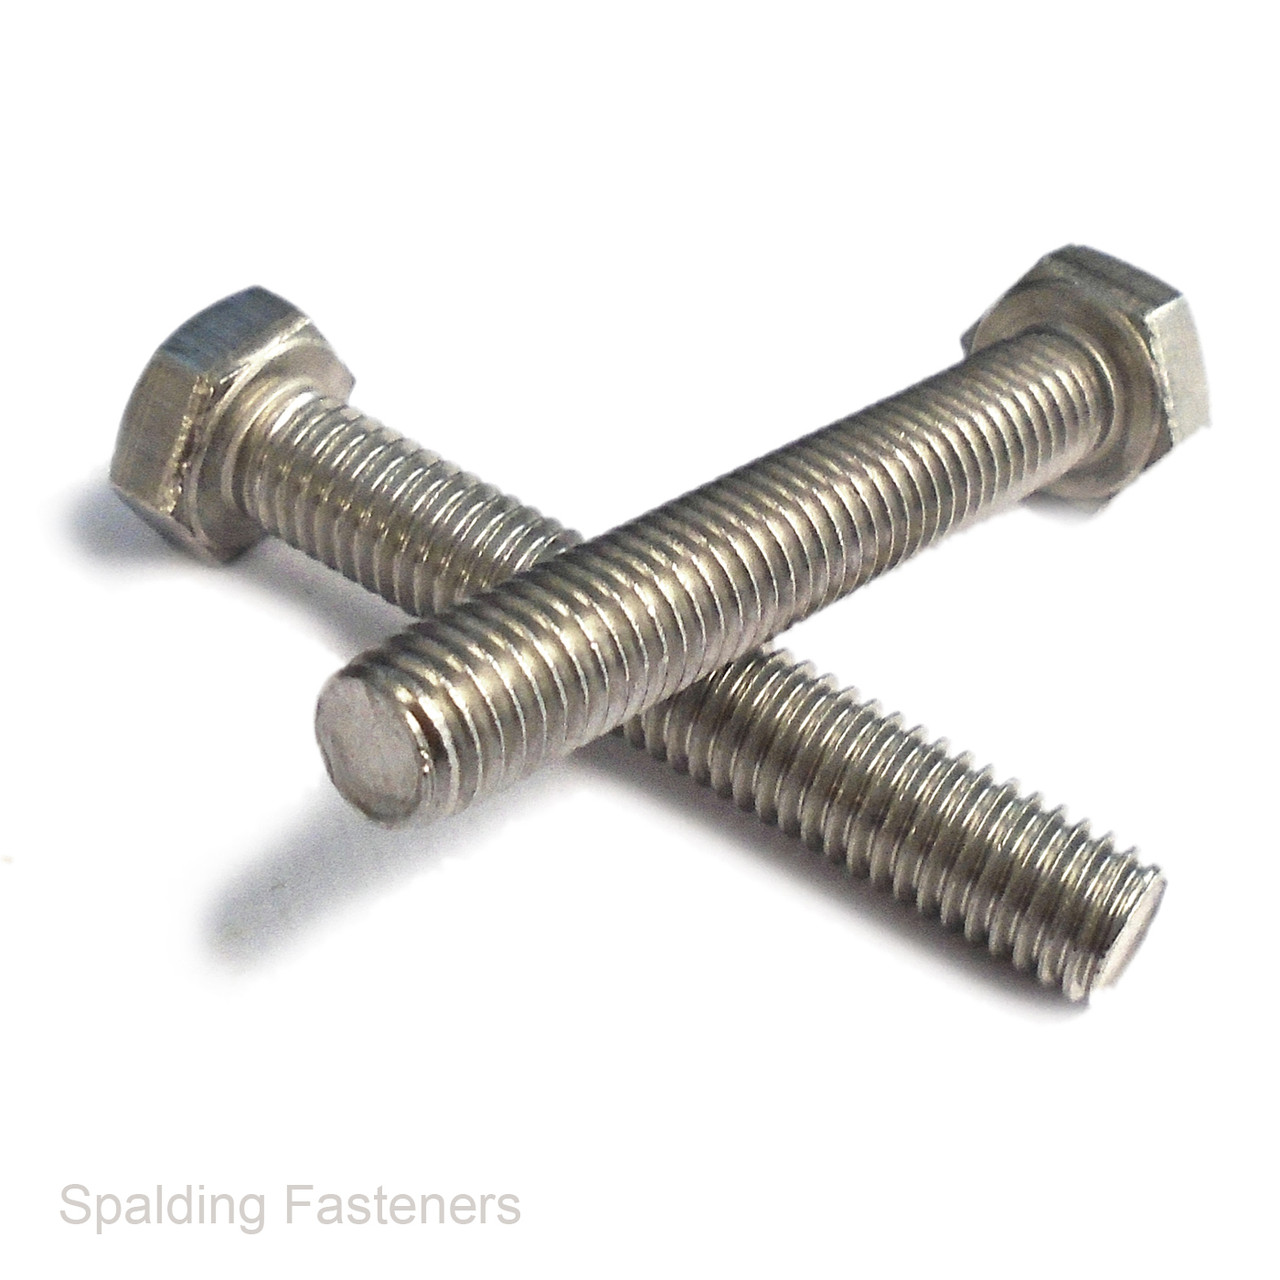 3/8" A2 STAINLESS UNF HEX BOLTS FULL NUTS AND WASHERS